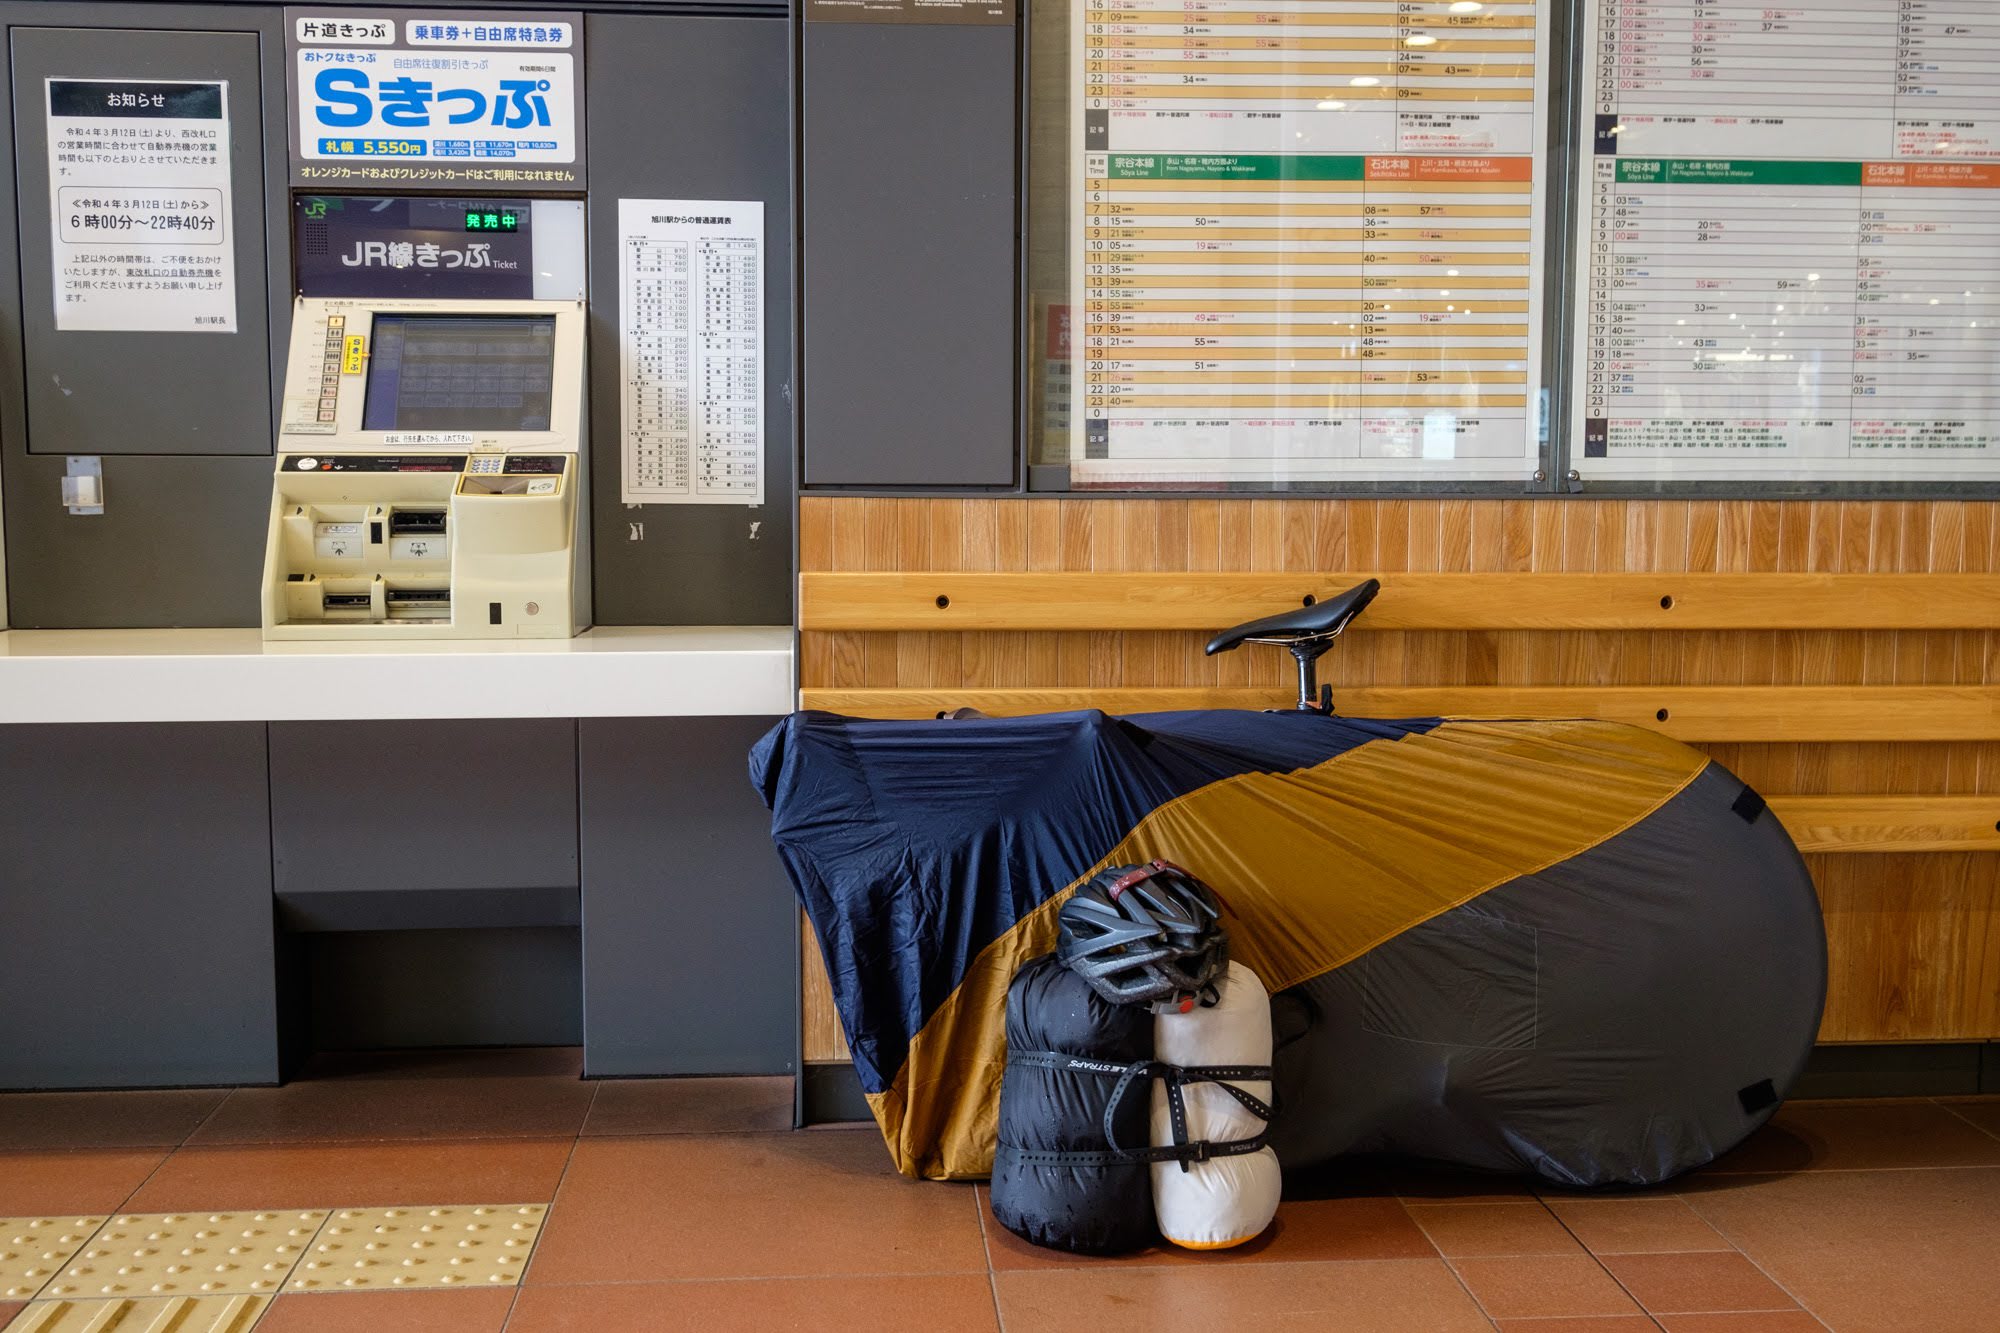 A bicycle is packed into a soft "rinko" bag for travel on the train. The saddle is poking out of the top of the bag and other luggage is stored in dry bags. The gear is leaning on a wall next to a ticket machine.